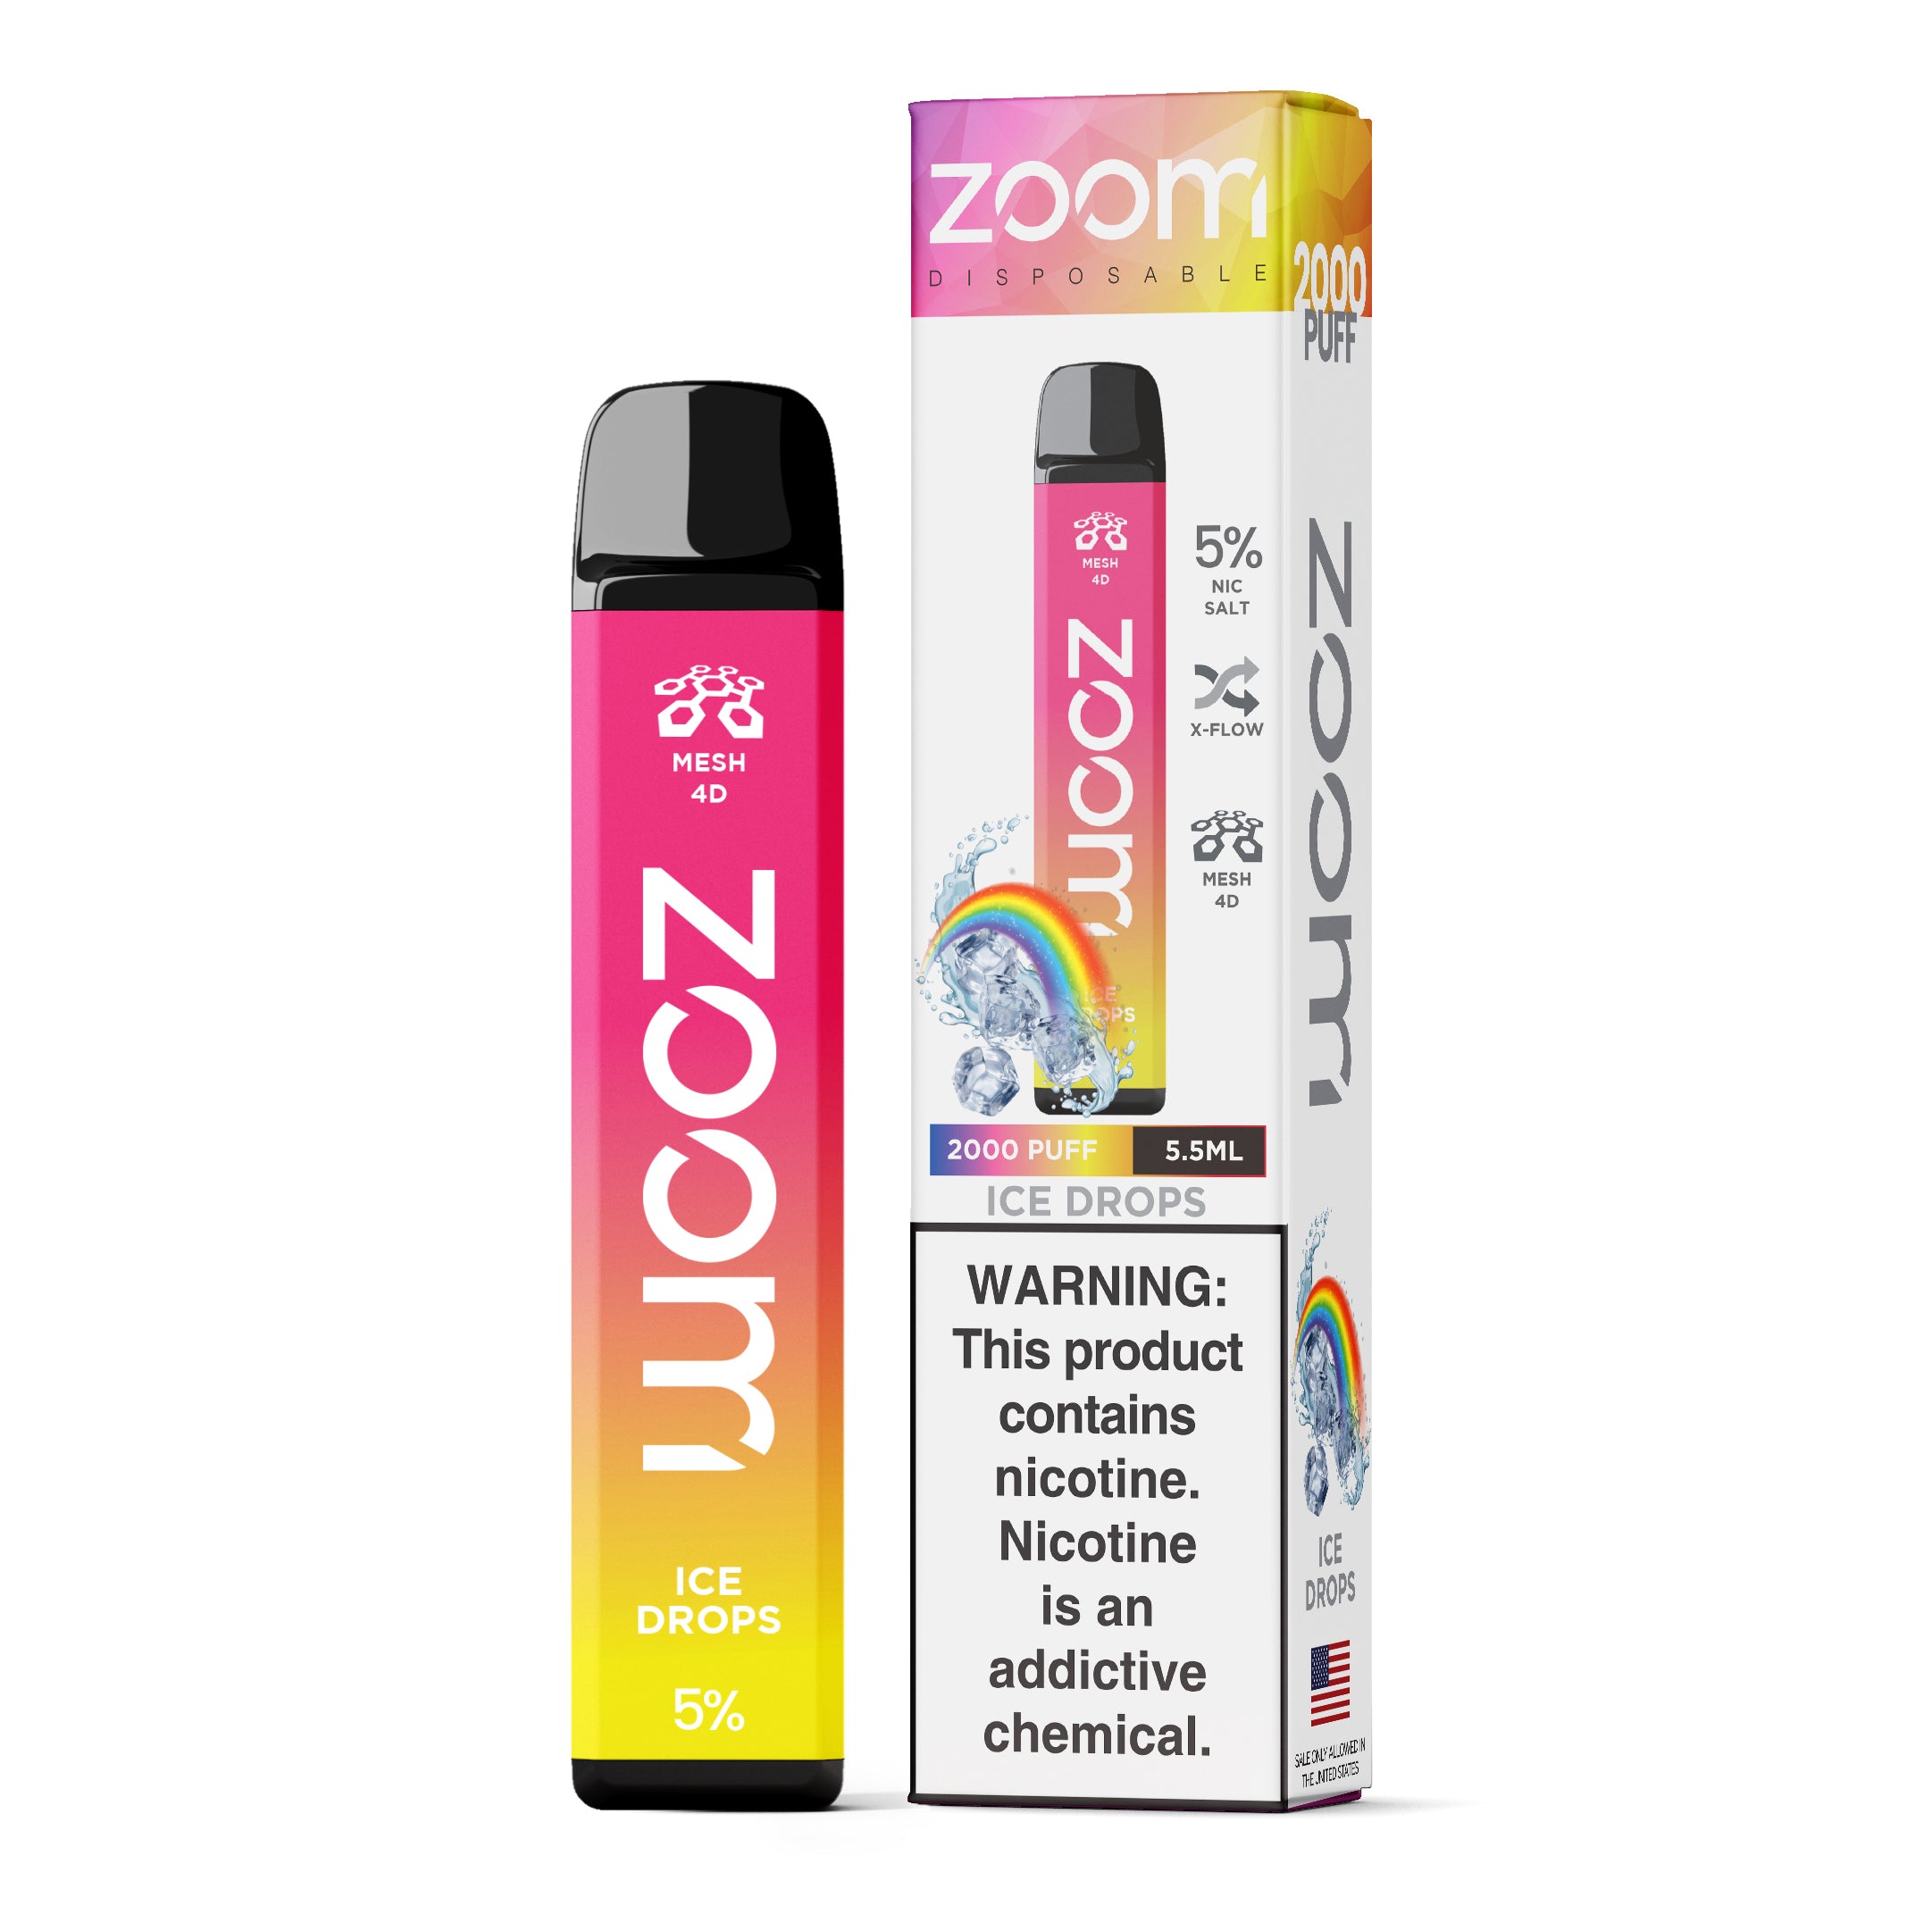 Zoom Disposable | 2000 Puffs | 5.5mL Ice Drops with packaging